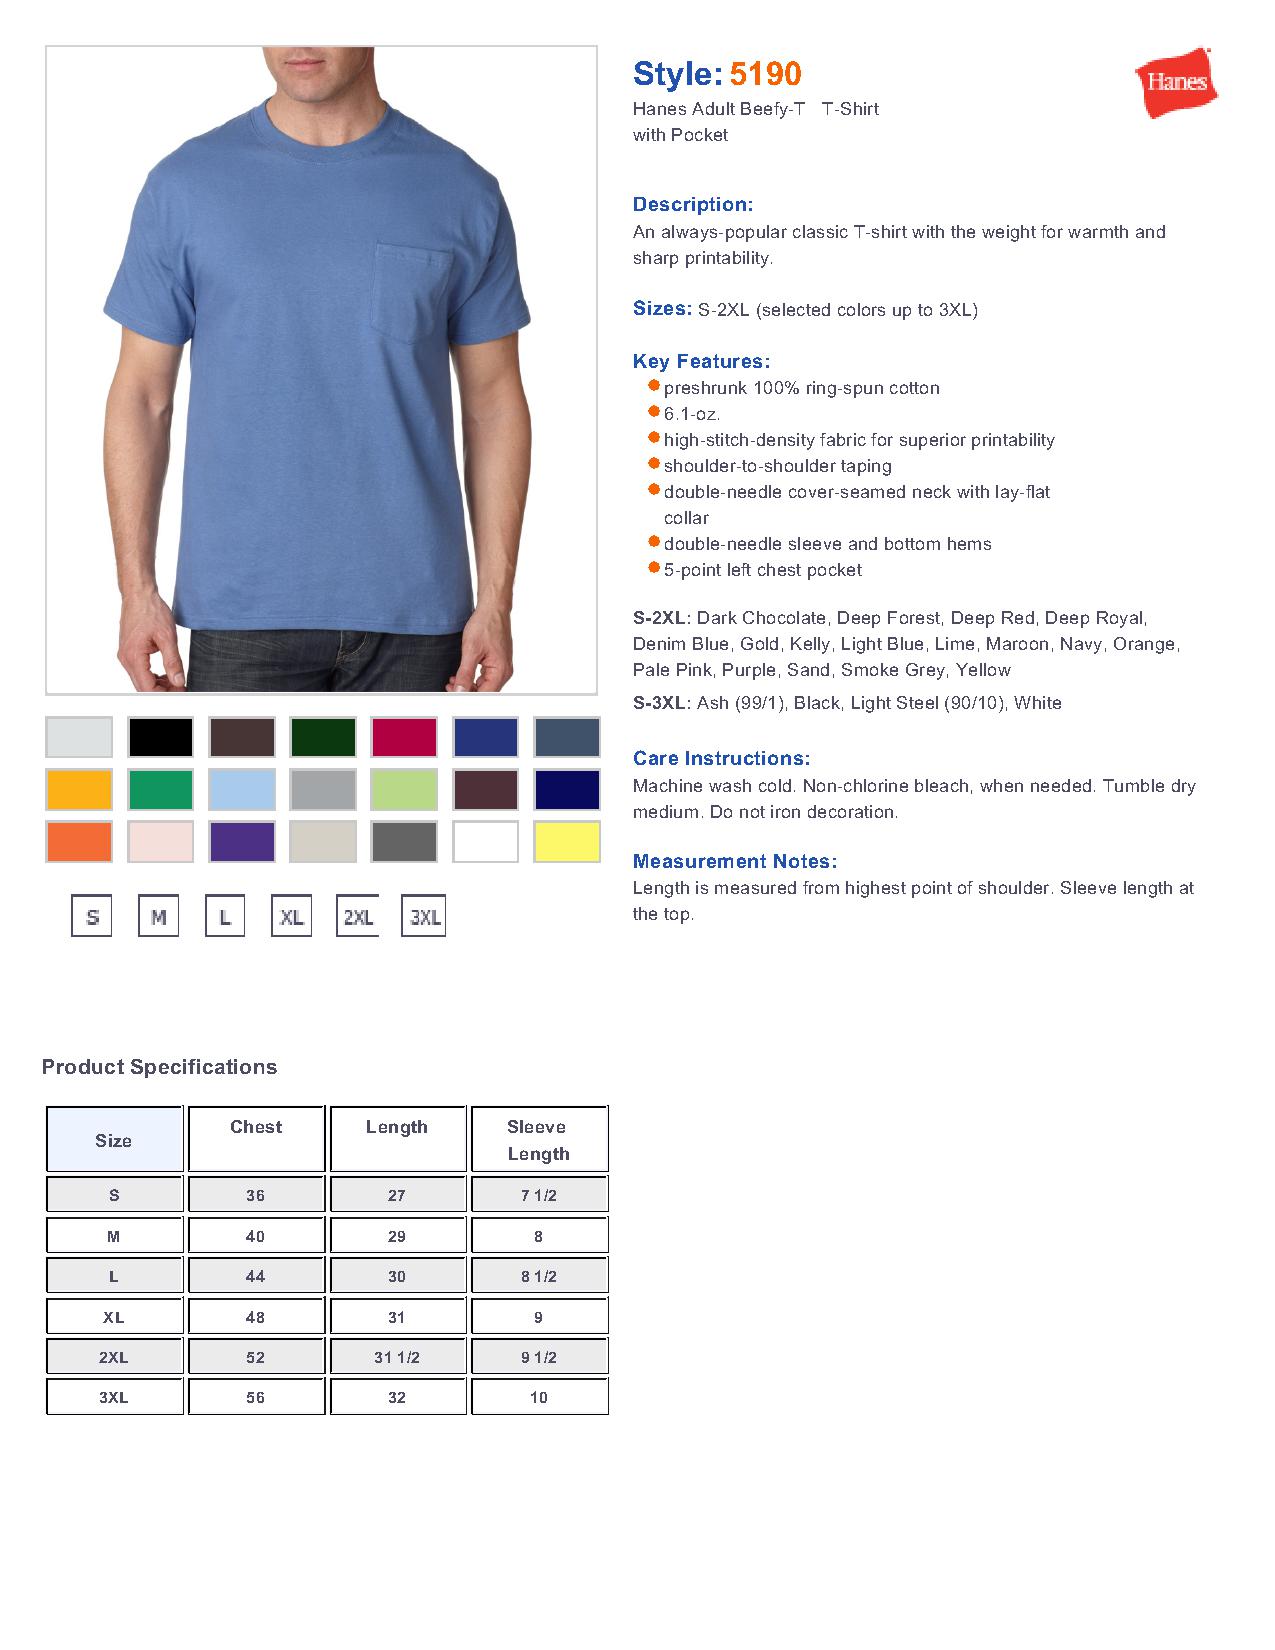 Hanes 5190 - Adult Beefy-T with Pocket $5.91 - Men's T-Shirts